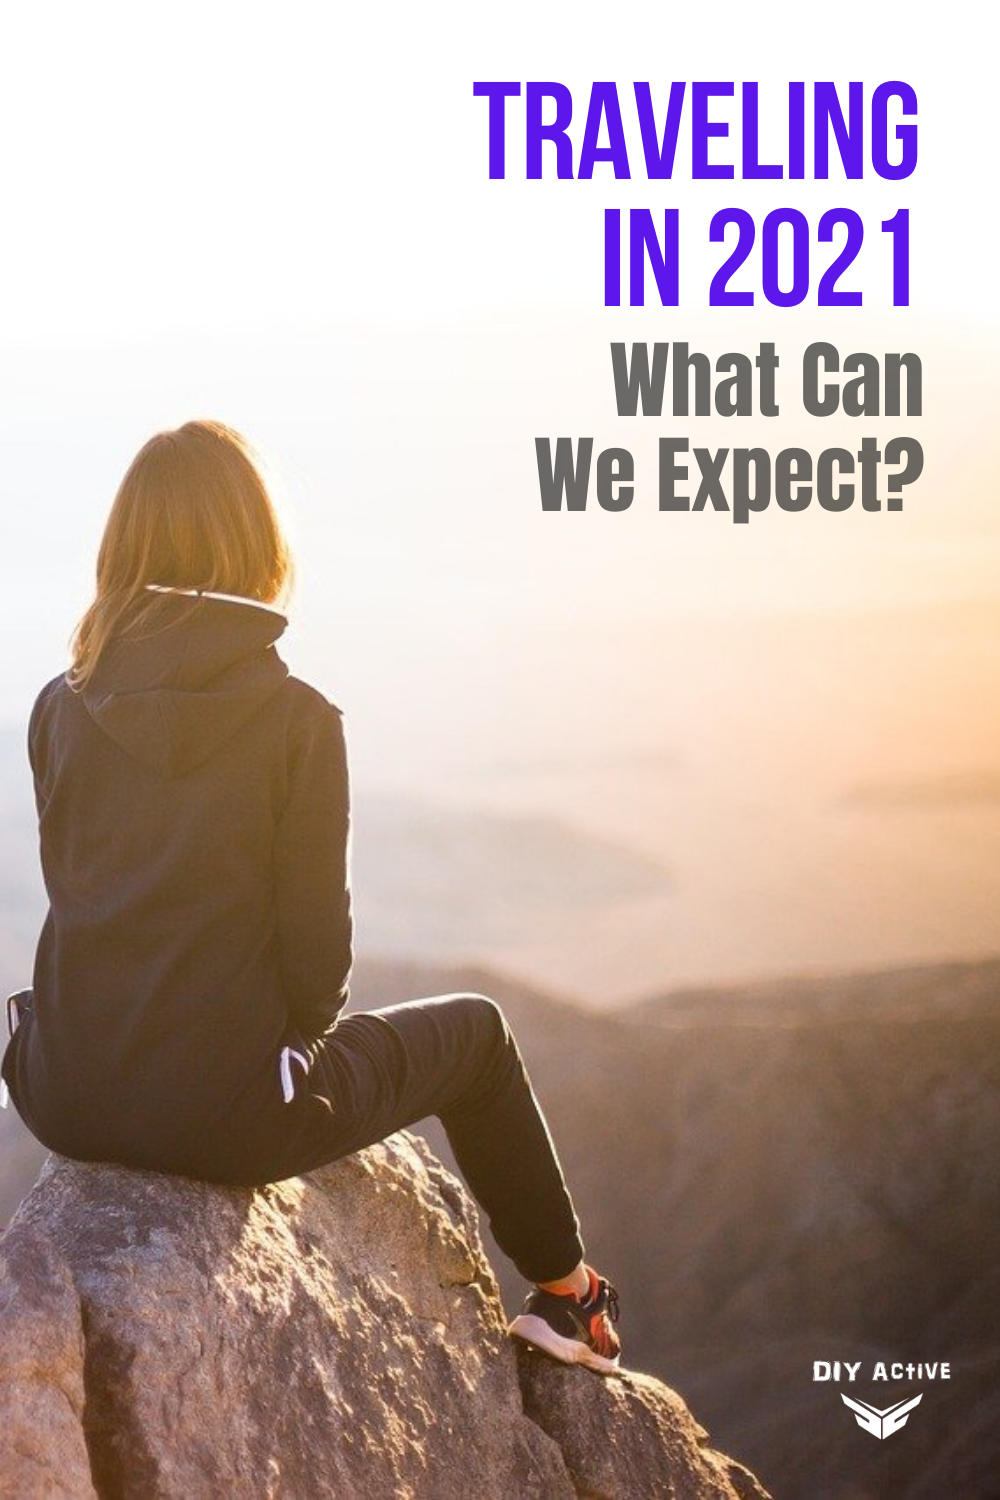 Traveling in 2021: What Can We Expect?